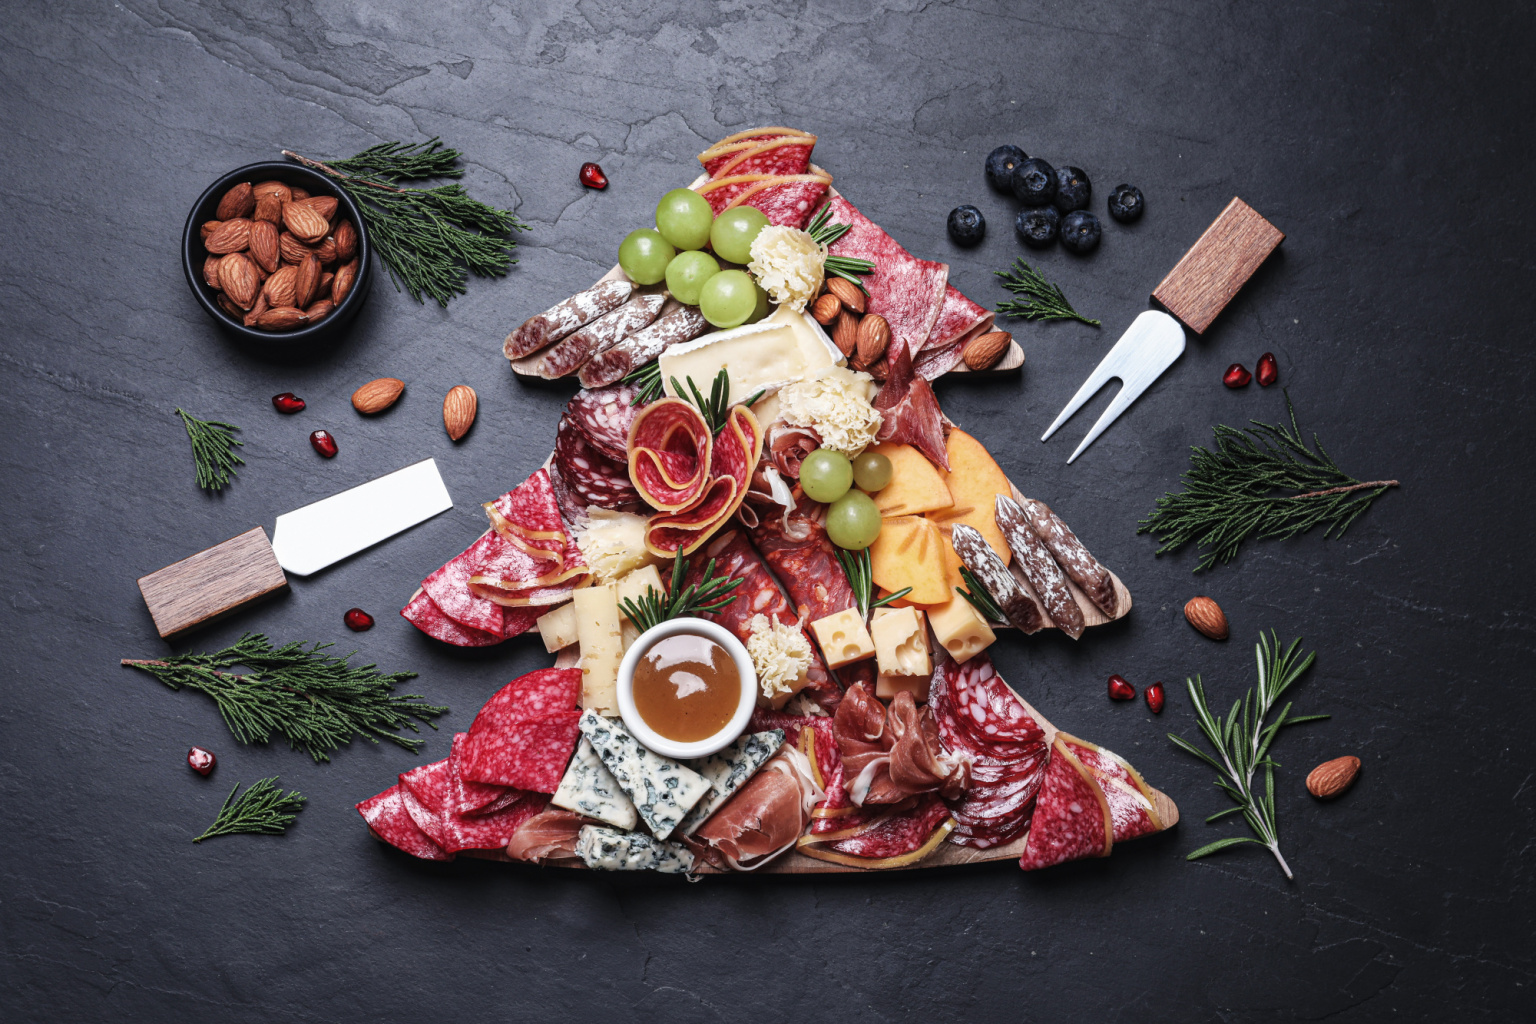 How To Make a Charcuterie Board That Will Wow Your Guests